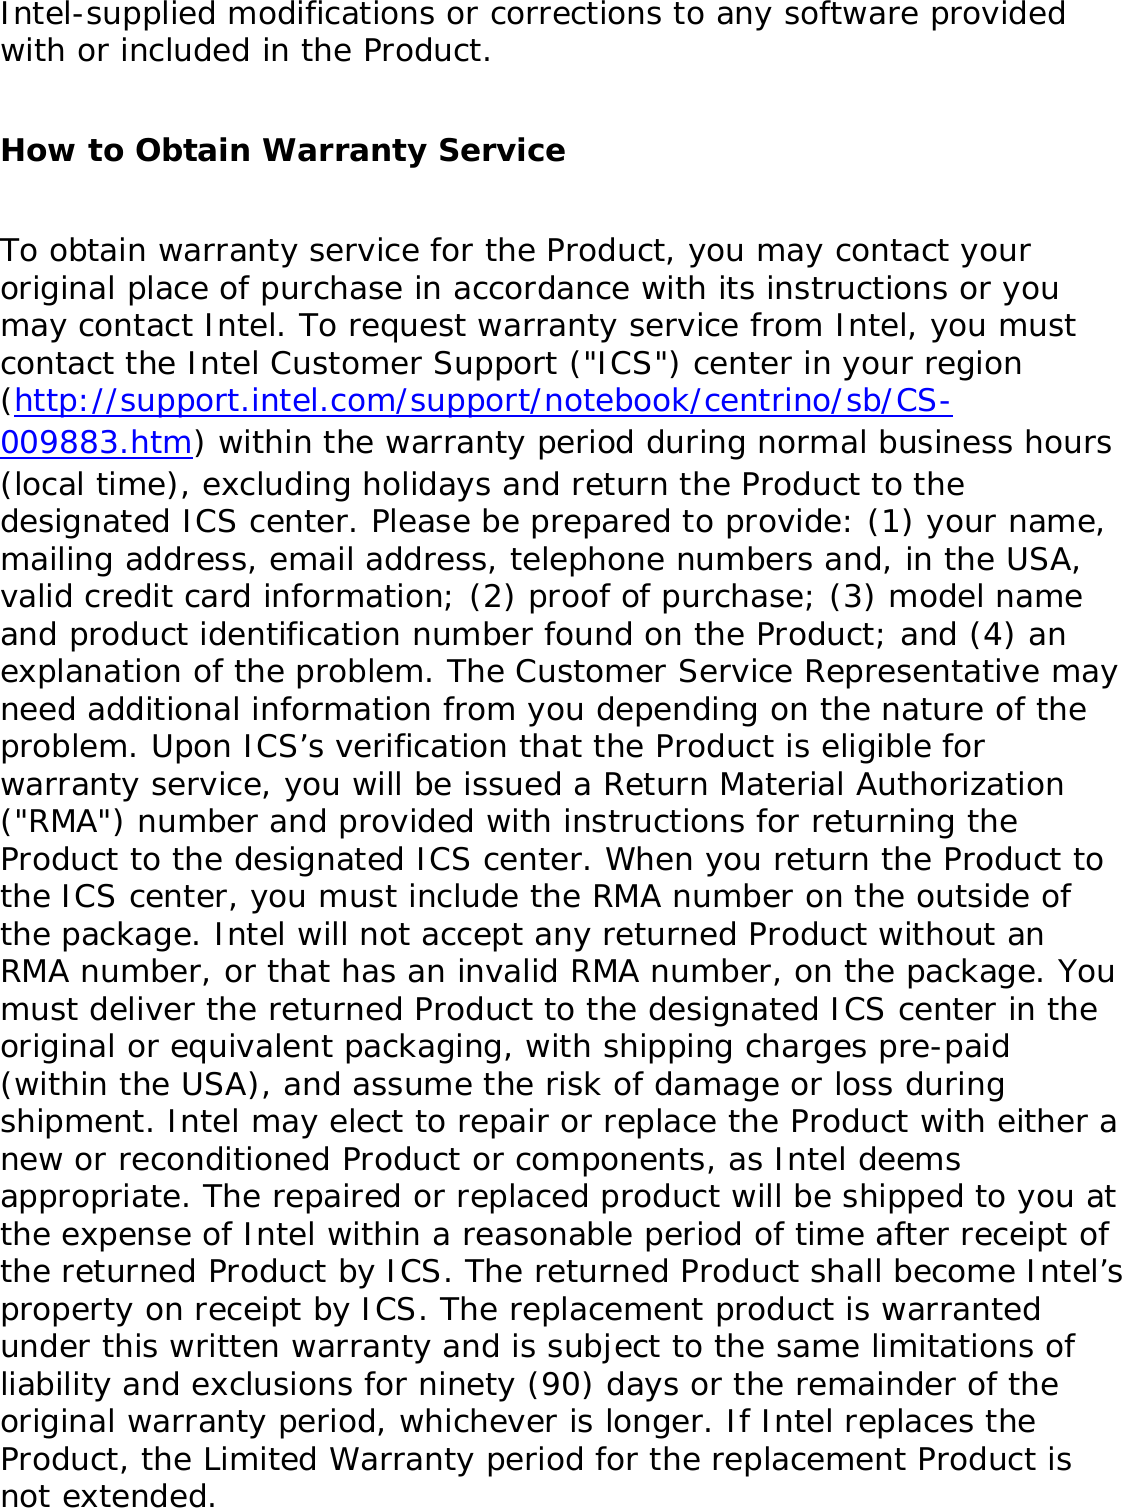 If the Product which is the subject of this Limited Warranty fails during the warranty period for reasons covered by this Limited Warranty, Intel, at its option, will: ●     REPAIR the Product by means of hardware and/or software; OR●     REPLACE the Product with another product, OR, if Intel is unable to repair or replace the Product, ●     REFUND the then-current Intel price for the Product at the time a claim for warranty service is made to Intel under this Limited Warranty.THIS LIMITED WARRANTY, AND ANY IMPLIED WARRANTIES THAT MAY EXIST UNDER APPLICABLE STATE, NATIONAL, PROVINCIAL OR LOCAL LAW, APPLY ONLY TO YOU AS THE ORIGINAL PURCHASER OF THE PRODUCT. Extent of Limited WarrantyIntel does not warrant that the Product, whether purchased stand-alone or integrated with other products, including without limitation, semi-conductor components, will be free from design defects or errors known as &quot;errata.&quot; Current characterized errata are available upon request. Further, this Limited Warranty does NOT cover: (i) any costs associated with the replacement or repair of the Product, including labor, installation or other costs incurred by you, and in particular, any costs relating to the removal or replacement of any Product soldered or otherwise permanently affixed to any printed circuit board or integrated with other products; (ii) damage to the Product due to external causes, including accident, problems with electrical power, abnormal, mechanical or environmental conditions, usage not in accordance with product instructions, misuse, neglect, accident, abuse, alteration, repair, improper or unauthorized installation or improper testing, or (iii) any Product which has been modified or operated outside of Intel’s publicly available specifications or where the original product identification markings (trademark or serial number) have been removed, altered or obliterated from the Product; or (iv) issues resulting from modification (other than by Intel) of software products provided or included in the Product, (v) incorporation of software products, other than those software products provided or included in the Product by Intel, or (vi) failure to apply 